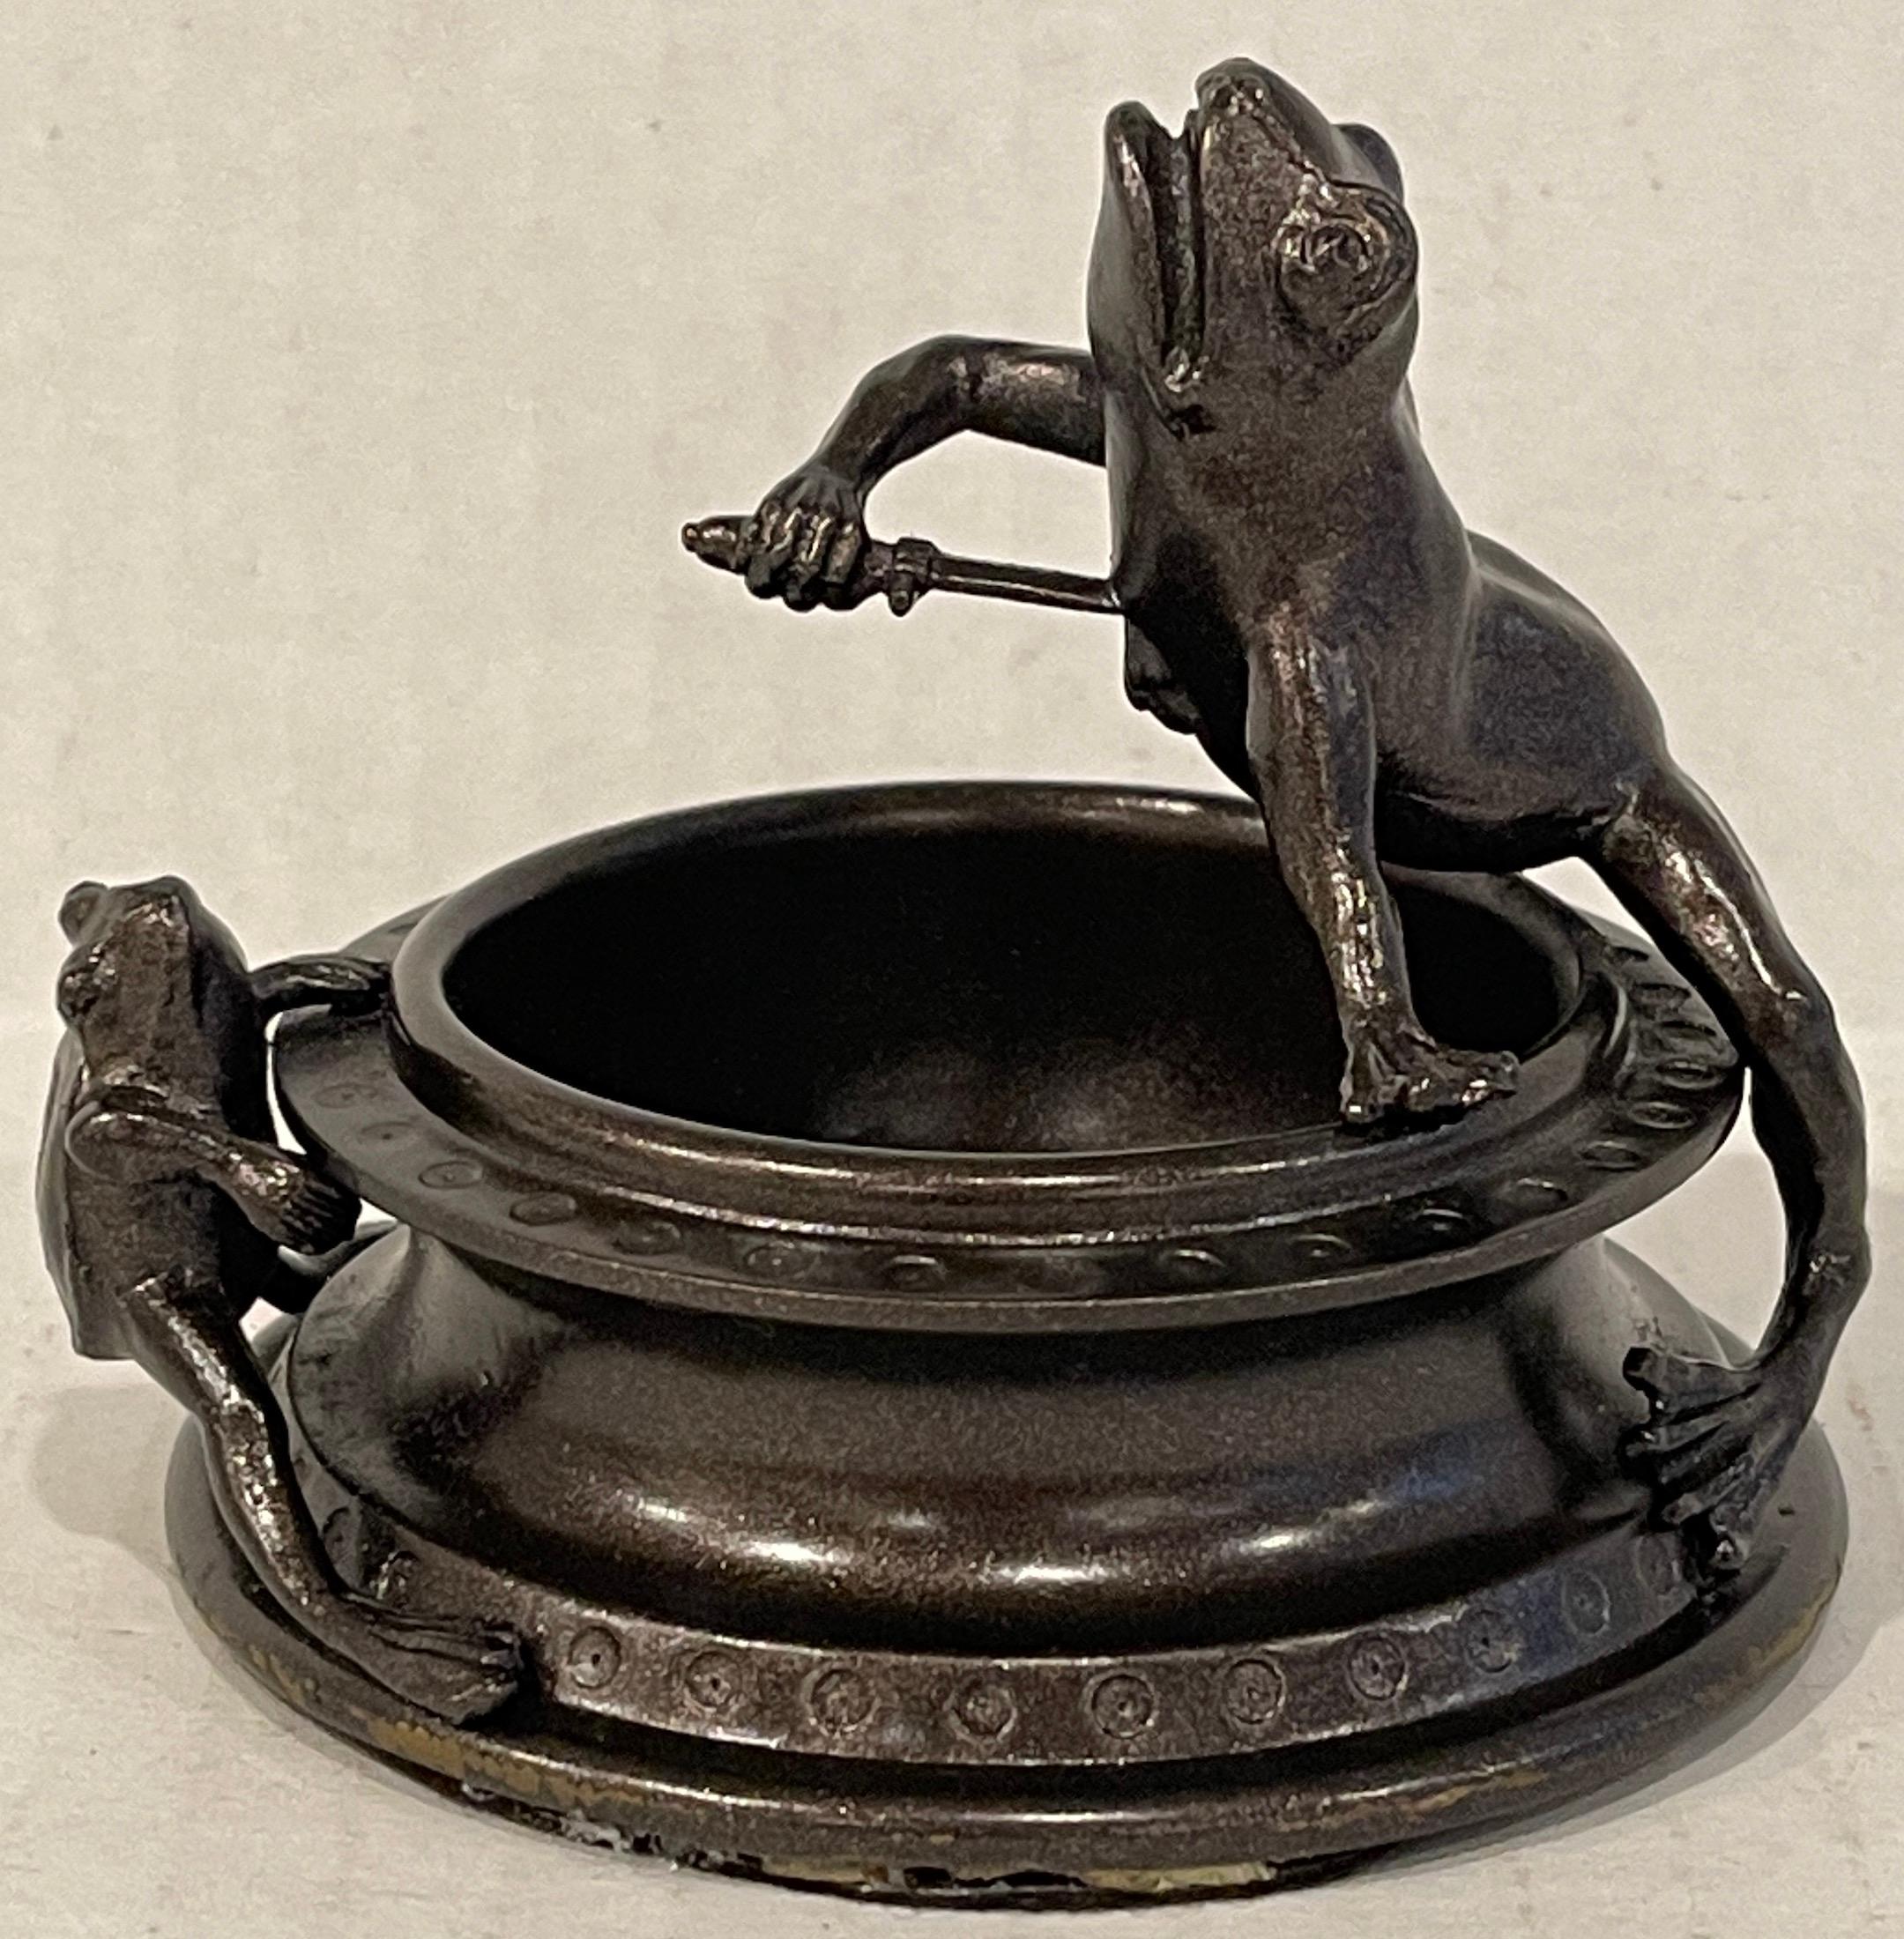 Victorian bronze operatic frog motif Vide-Poche, a petite Vide-Poche, depicting a frog stabbing itself with a sword, with a witness frog. An esoteric Victorian fancy objet. The catch all has a diameter of 2.5